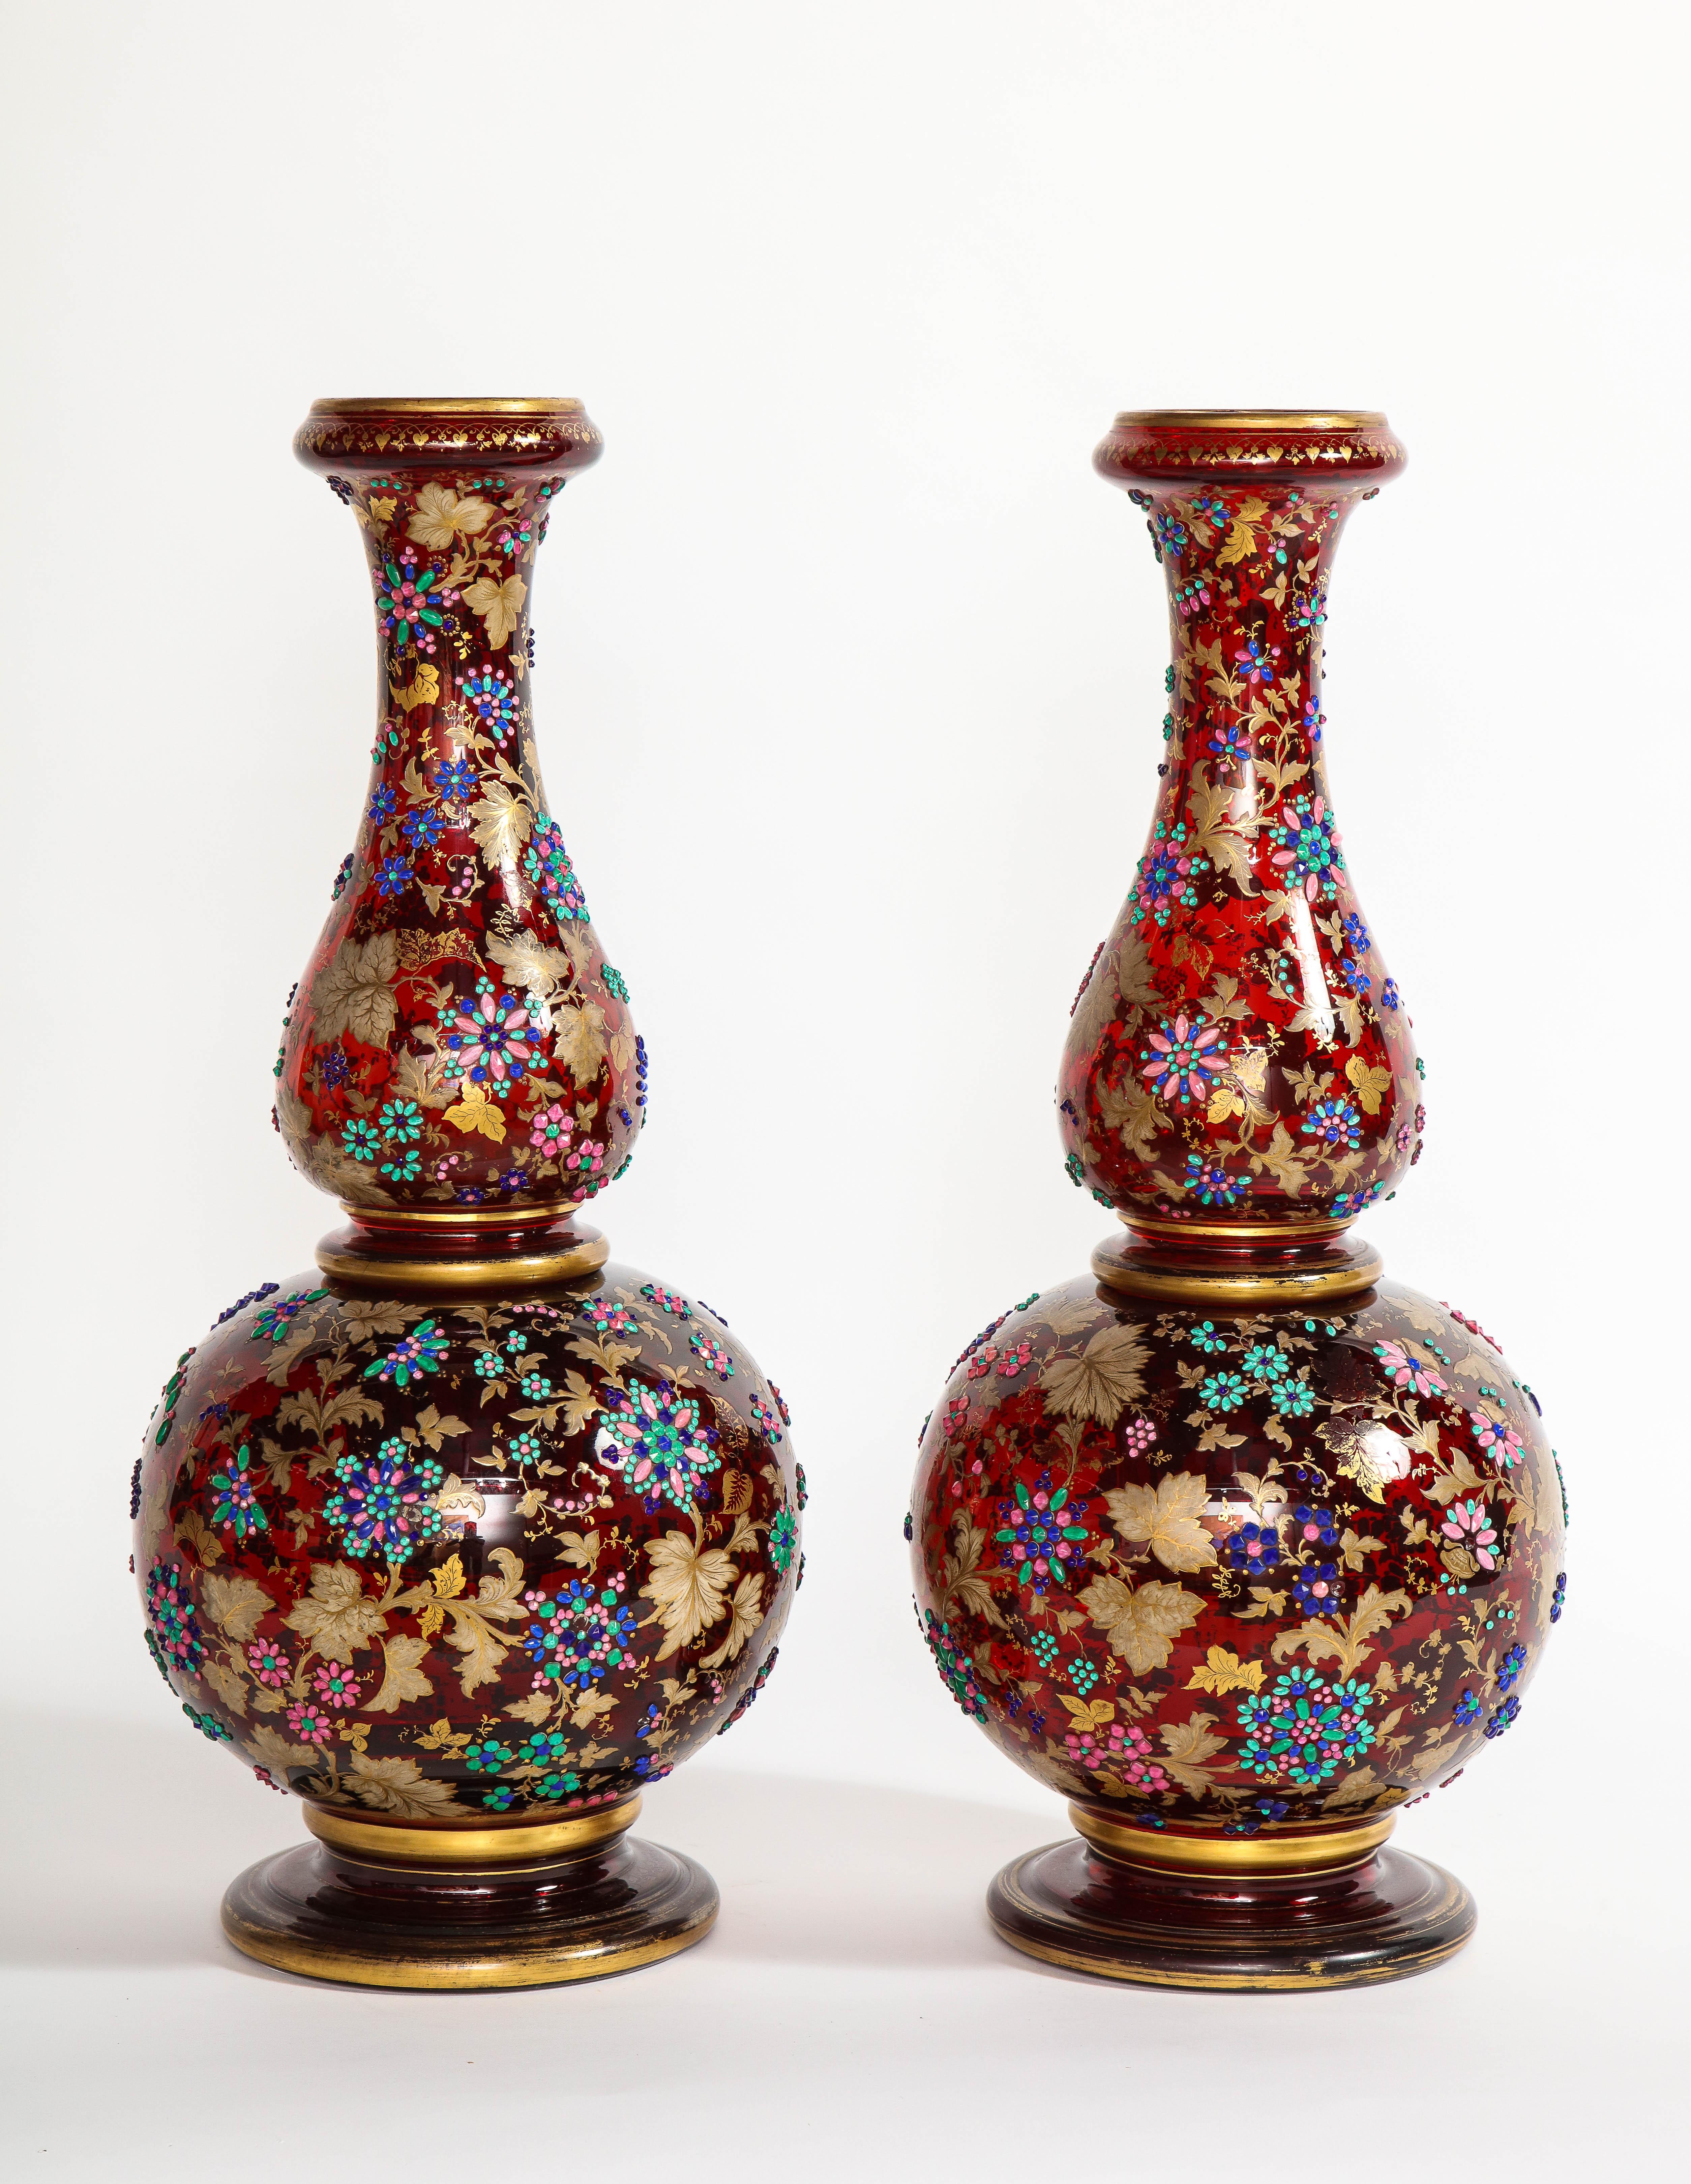 A monumental pair of antique 19th century Moser ruby-red overlay two-piece jeweled and 24-karat two toned, burnished and matte gold vases. Each of these vases are fabulously handcrafted with exquisite detail. Finely applied jewels and colored